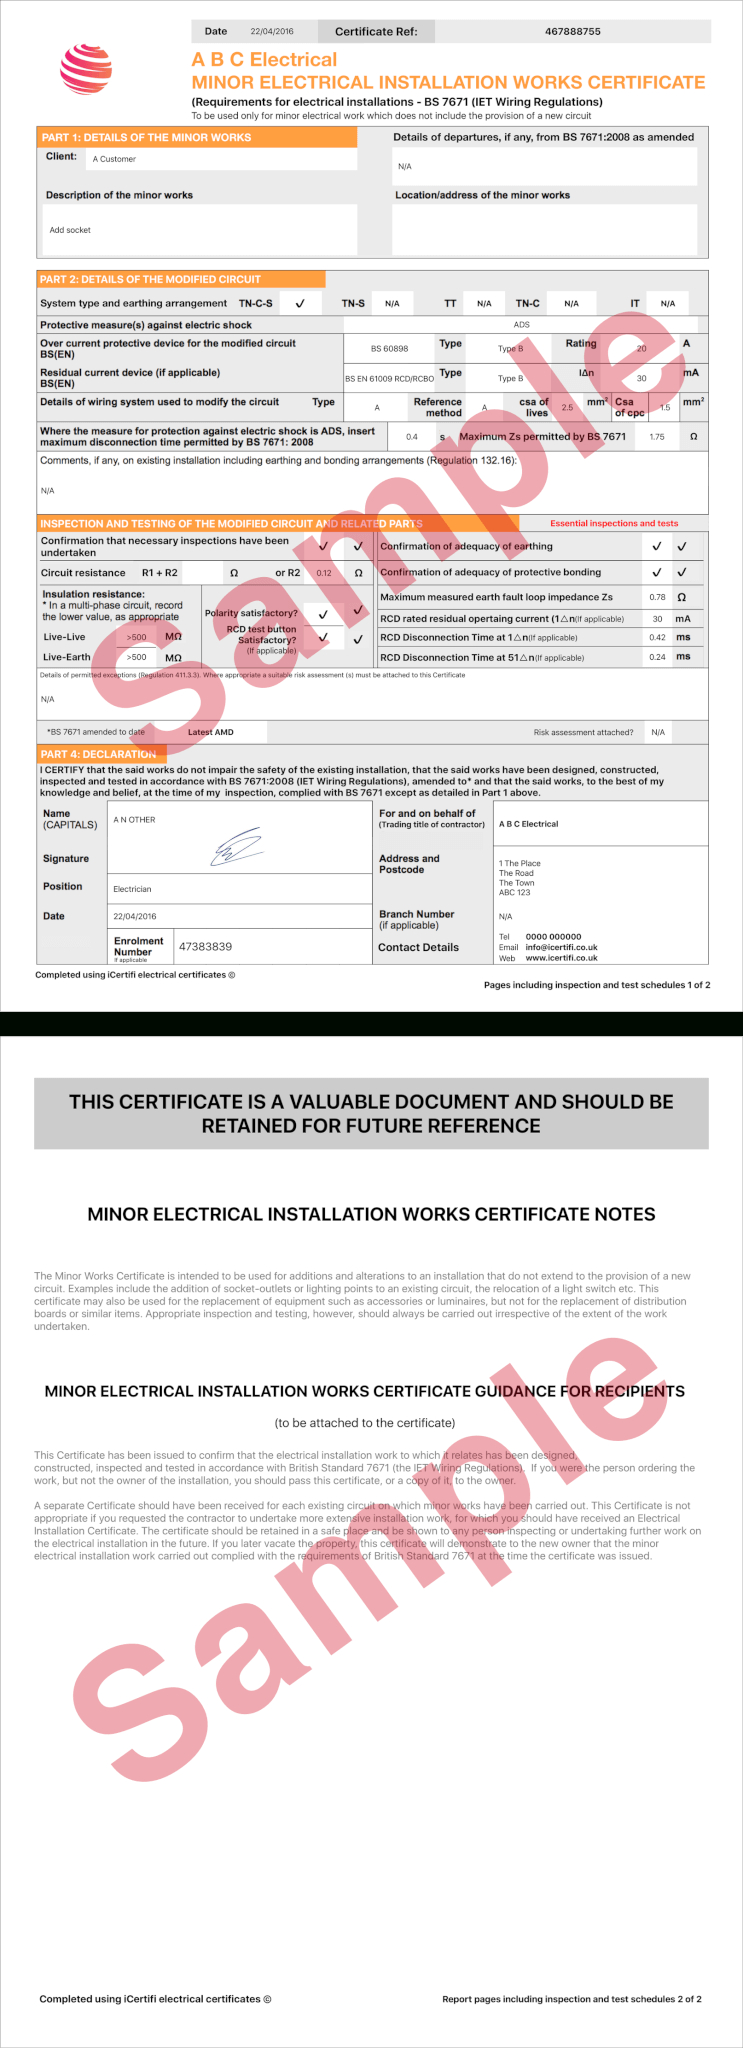 Electrical Certificate – Example Minor Works Certificate Throughout Electrical Minor Works Certificate Template